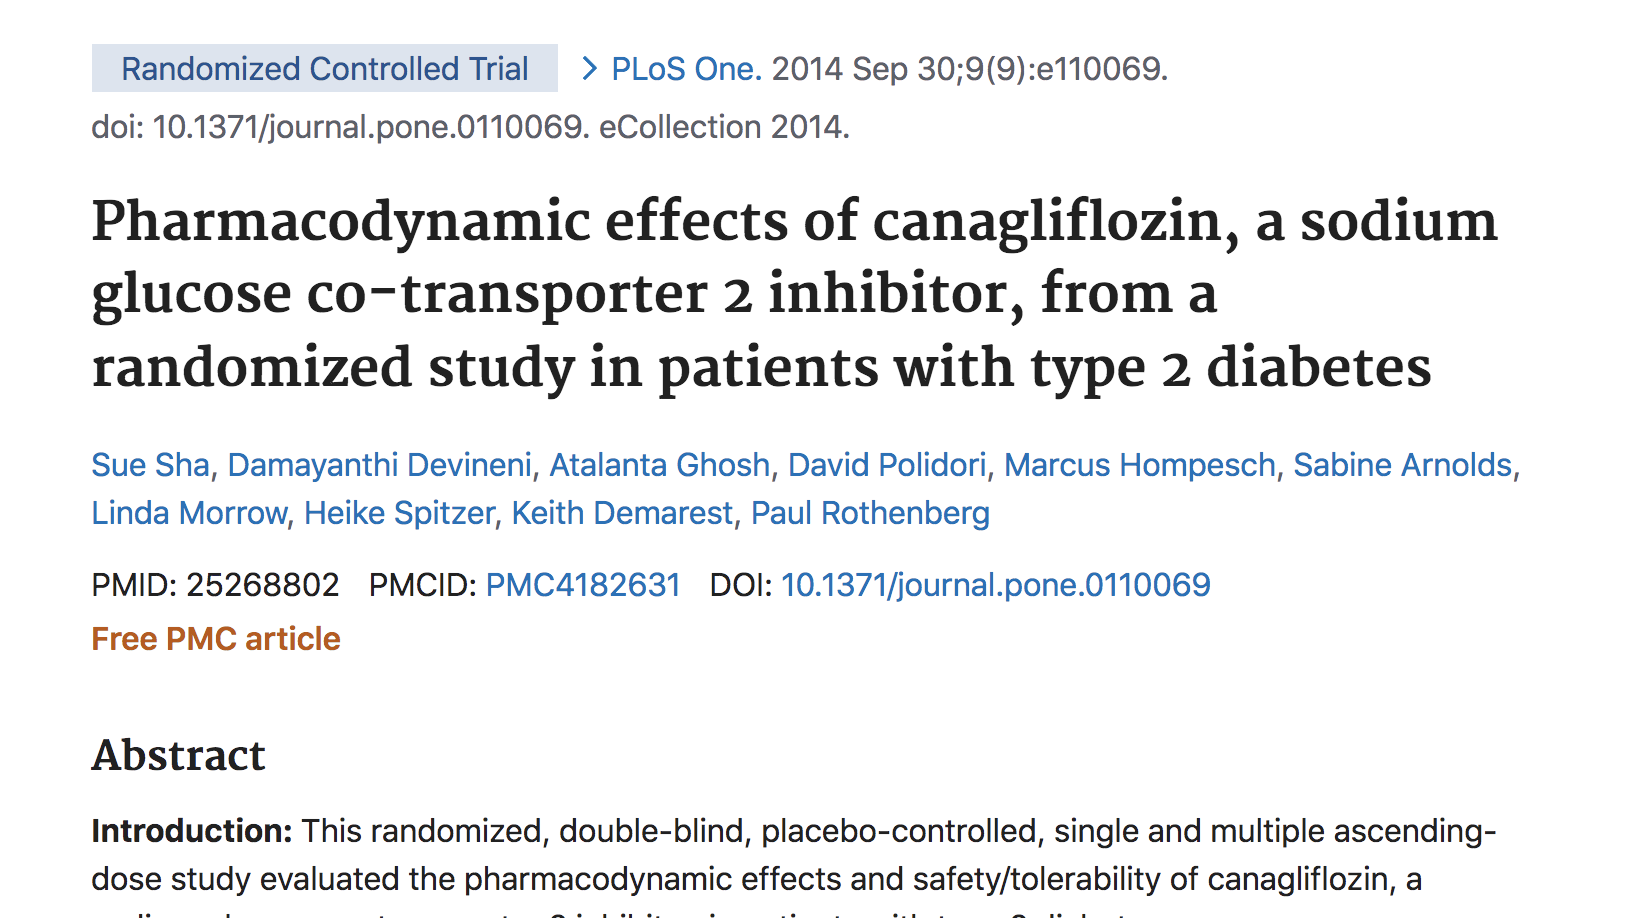 Pharmacodynamic effects of canagliflozin, a sodium glucose co-transporter 2 inhibitor, from a randomized study in patients with type 2 diabetes thumbnail